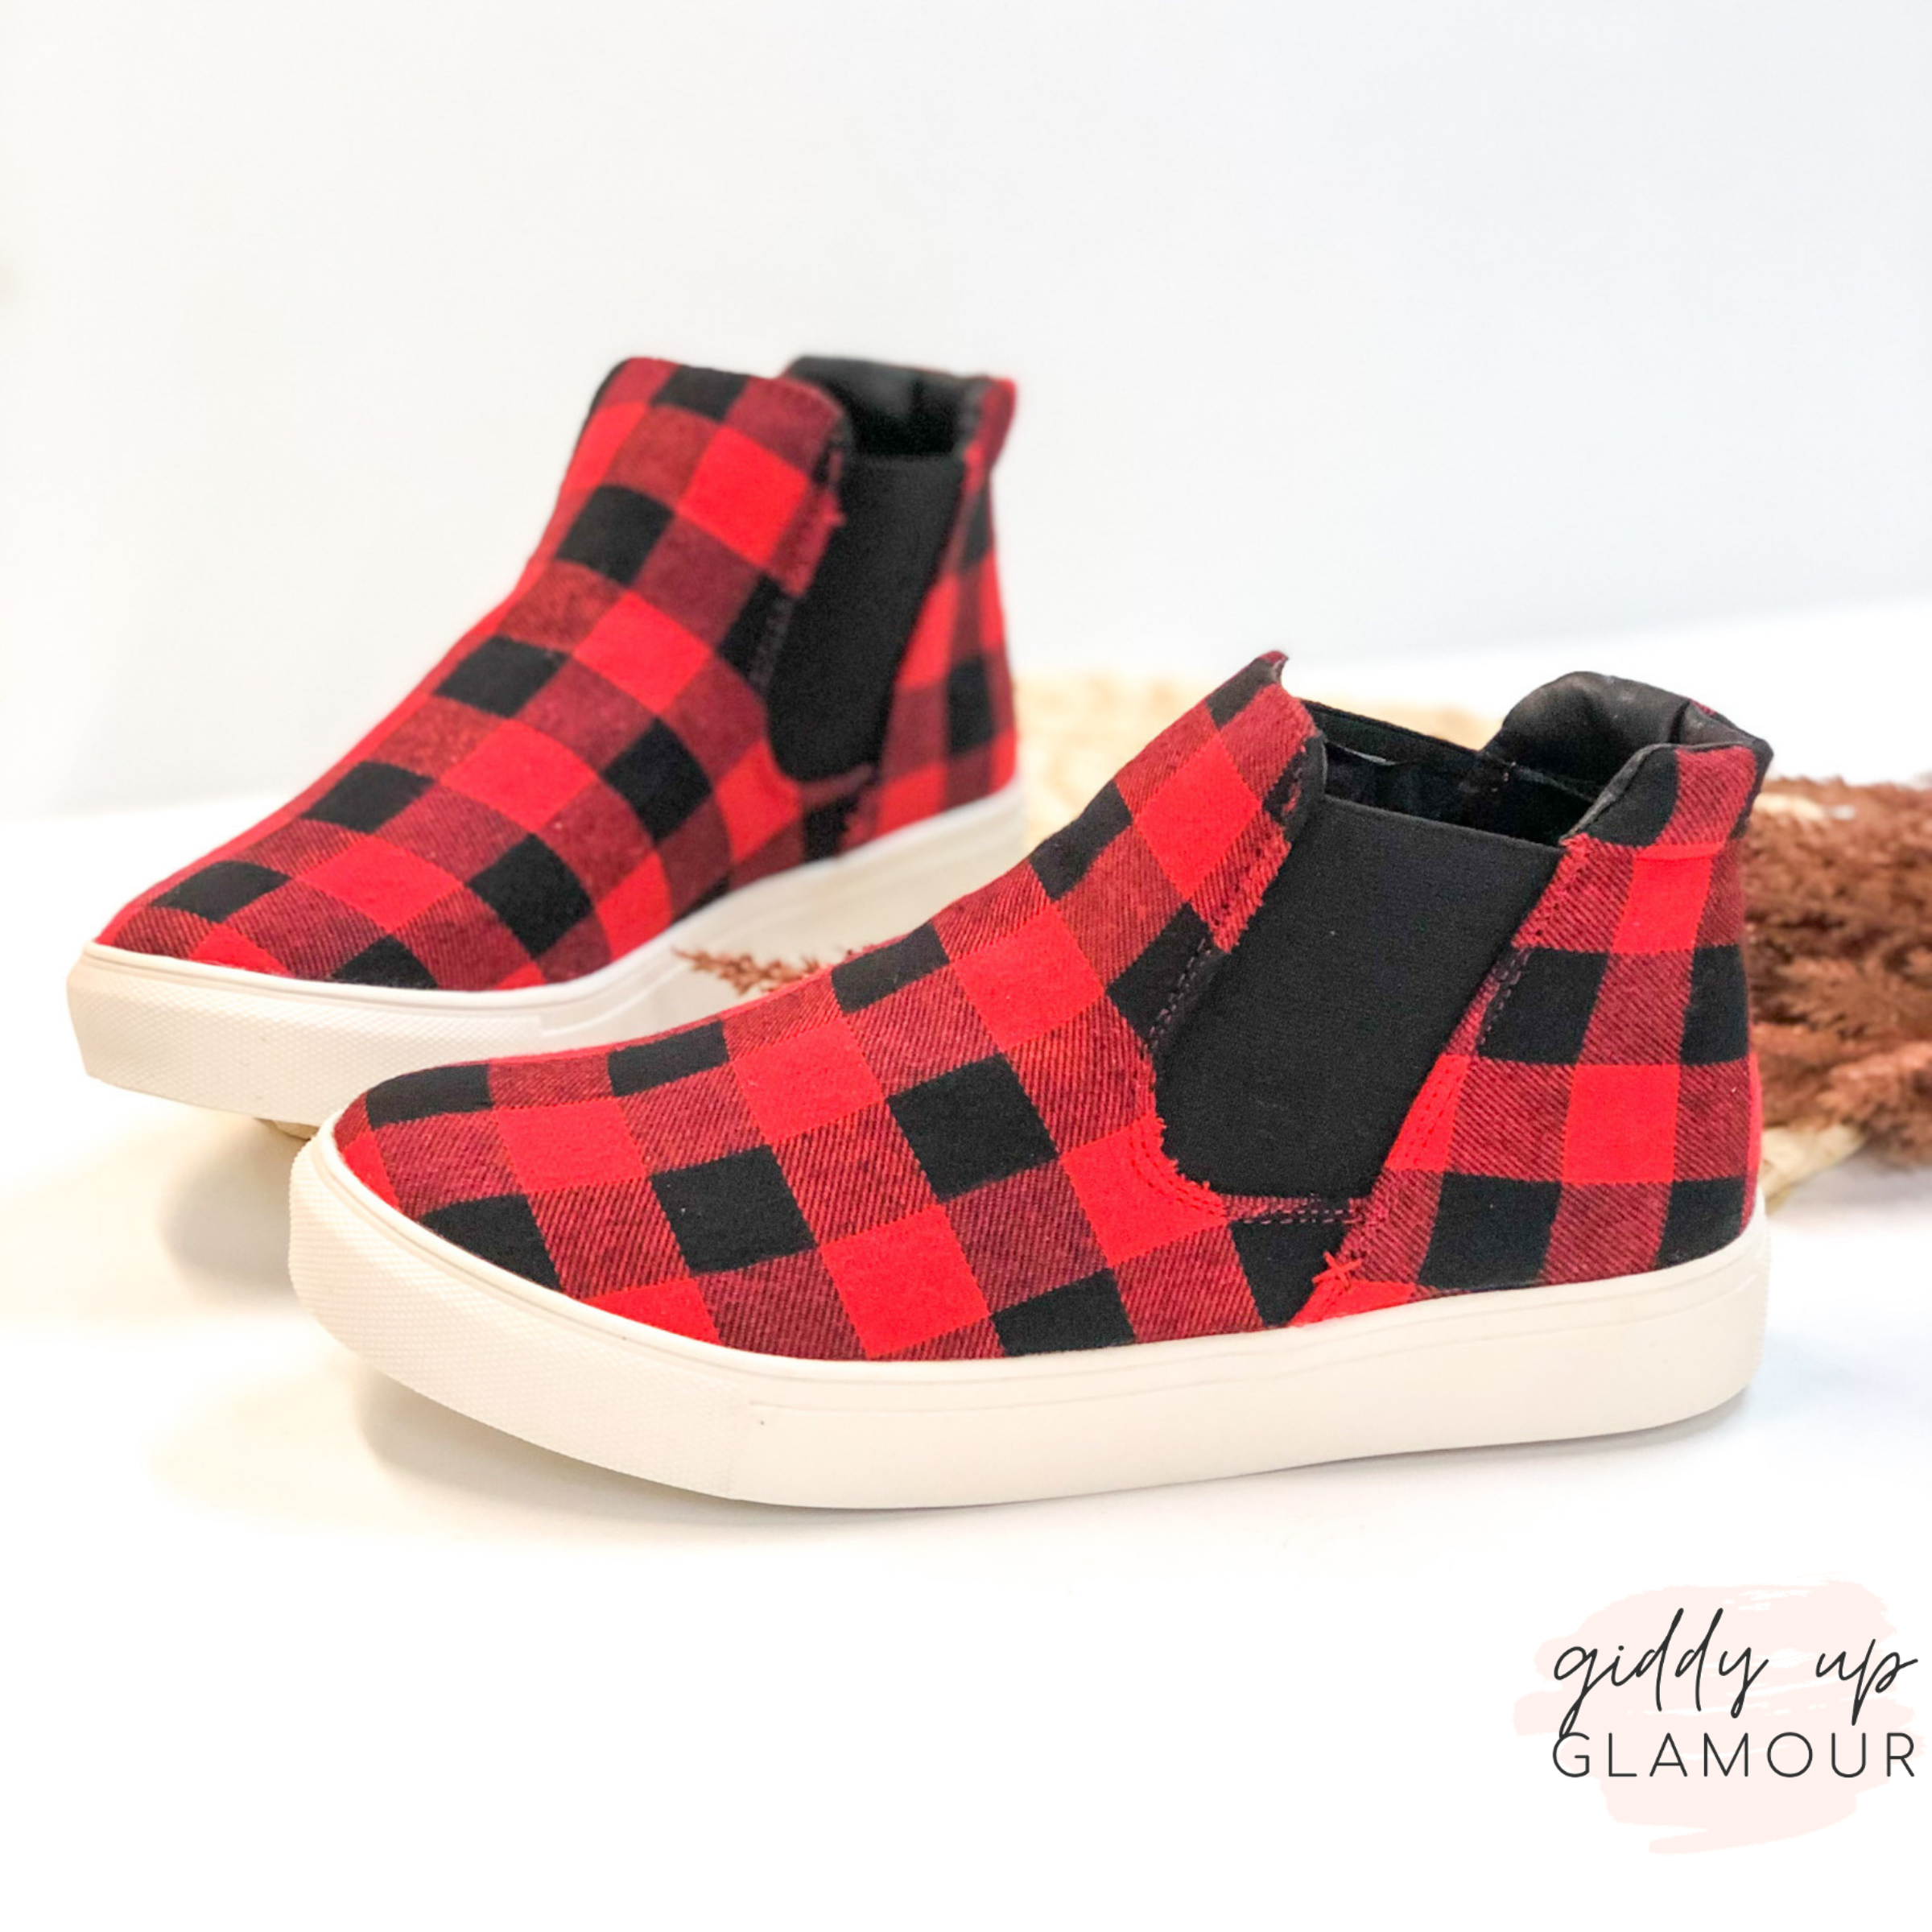 Very G | Downtown Stroll High Top Slip On Buffalo Plaid Sneakers in Red - Giddy Up Glamour Boutique